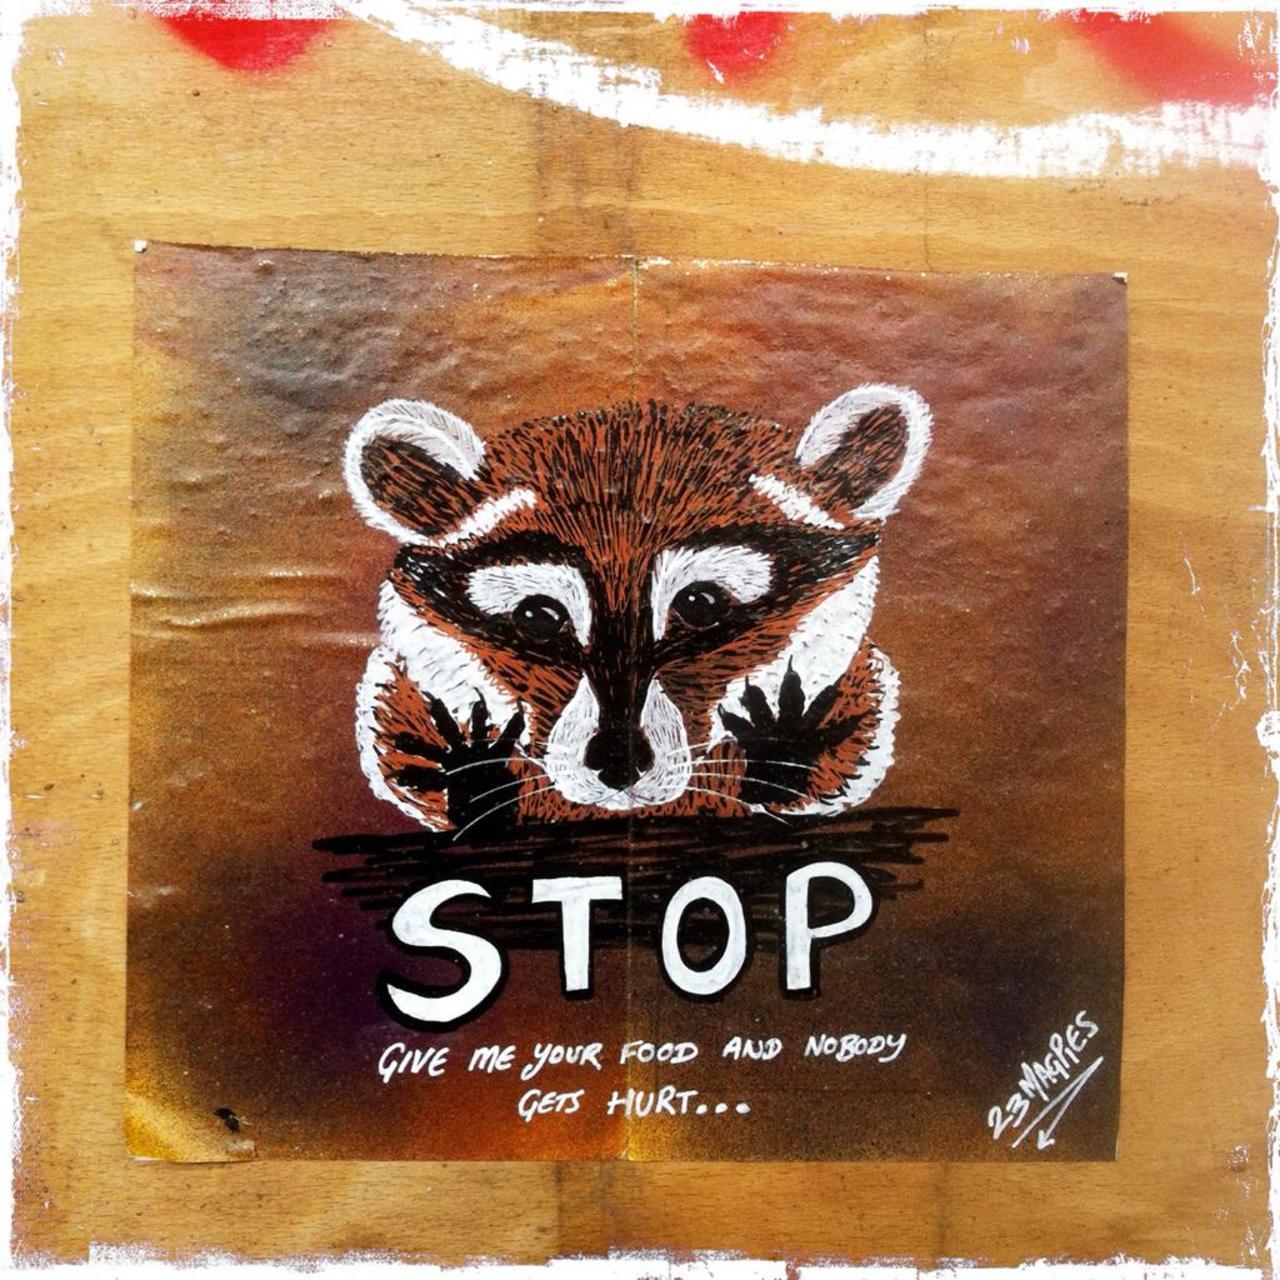 STOP: Give me your food and nobody gets hurt

#23Magpies paste-up on Grimsby Street #art #streetart #graffiti http://t.co/77ovH0KMIa